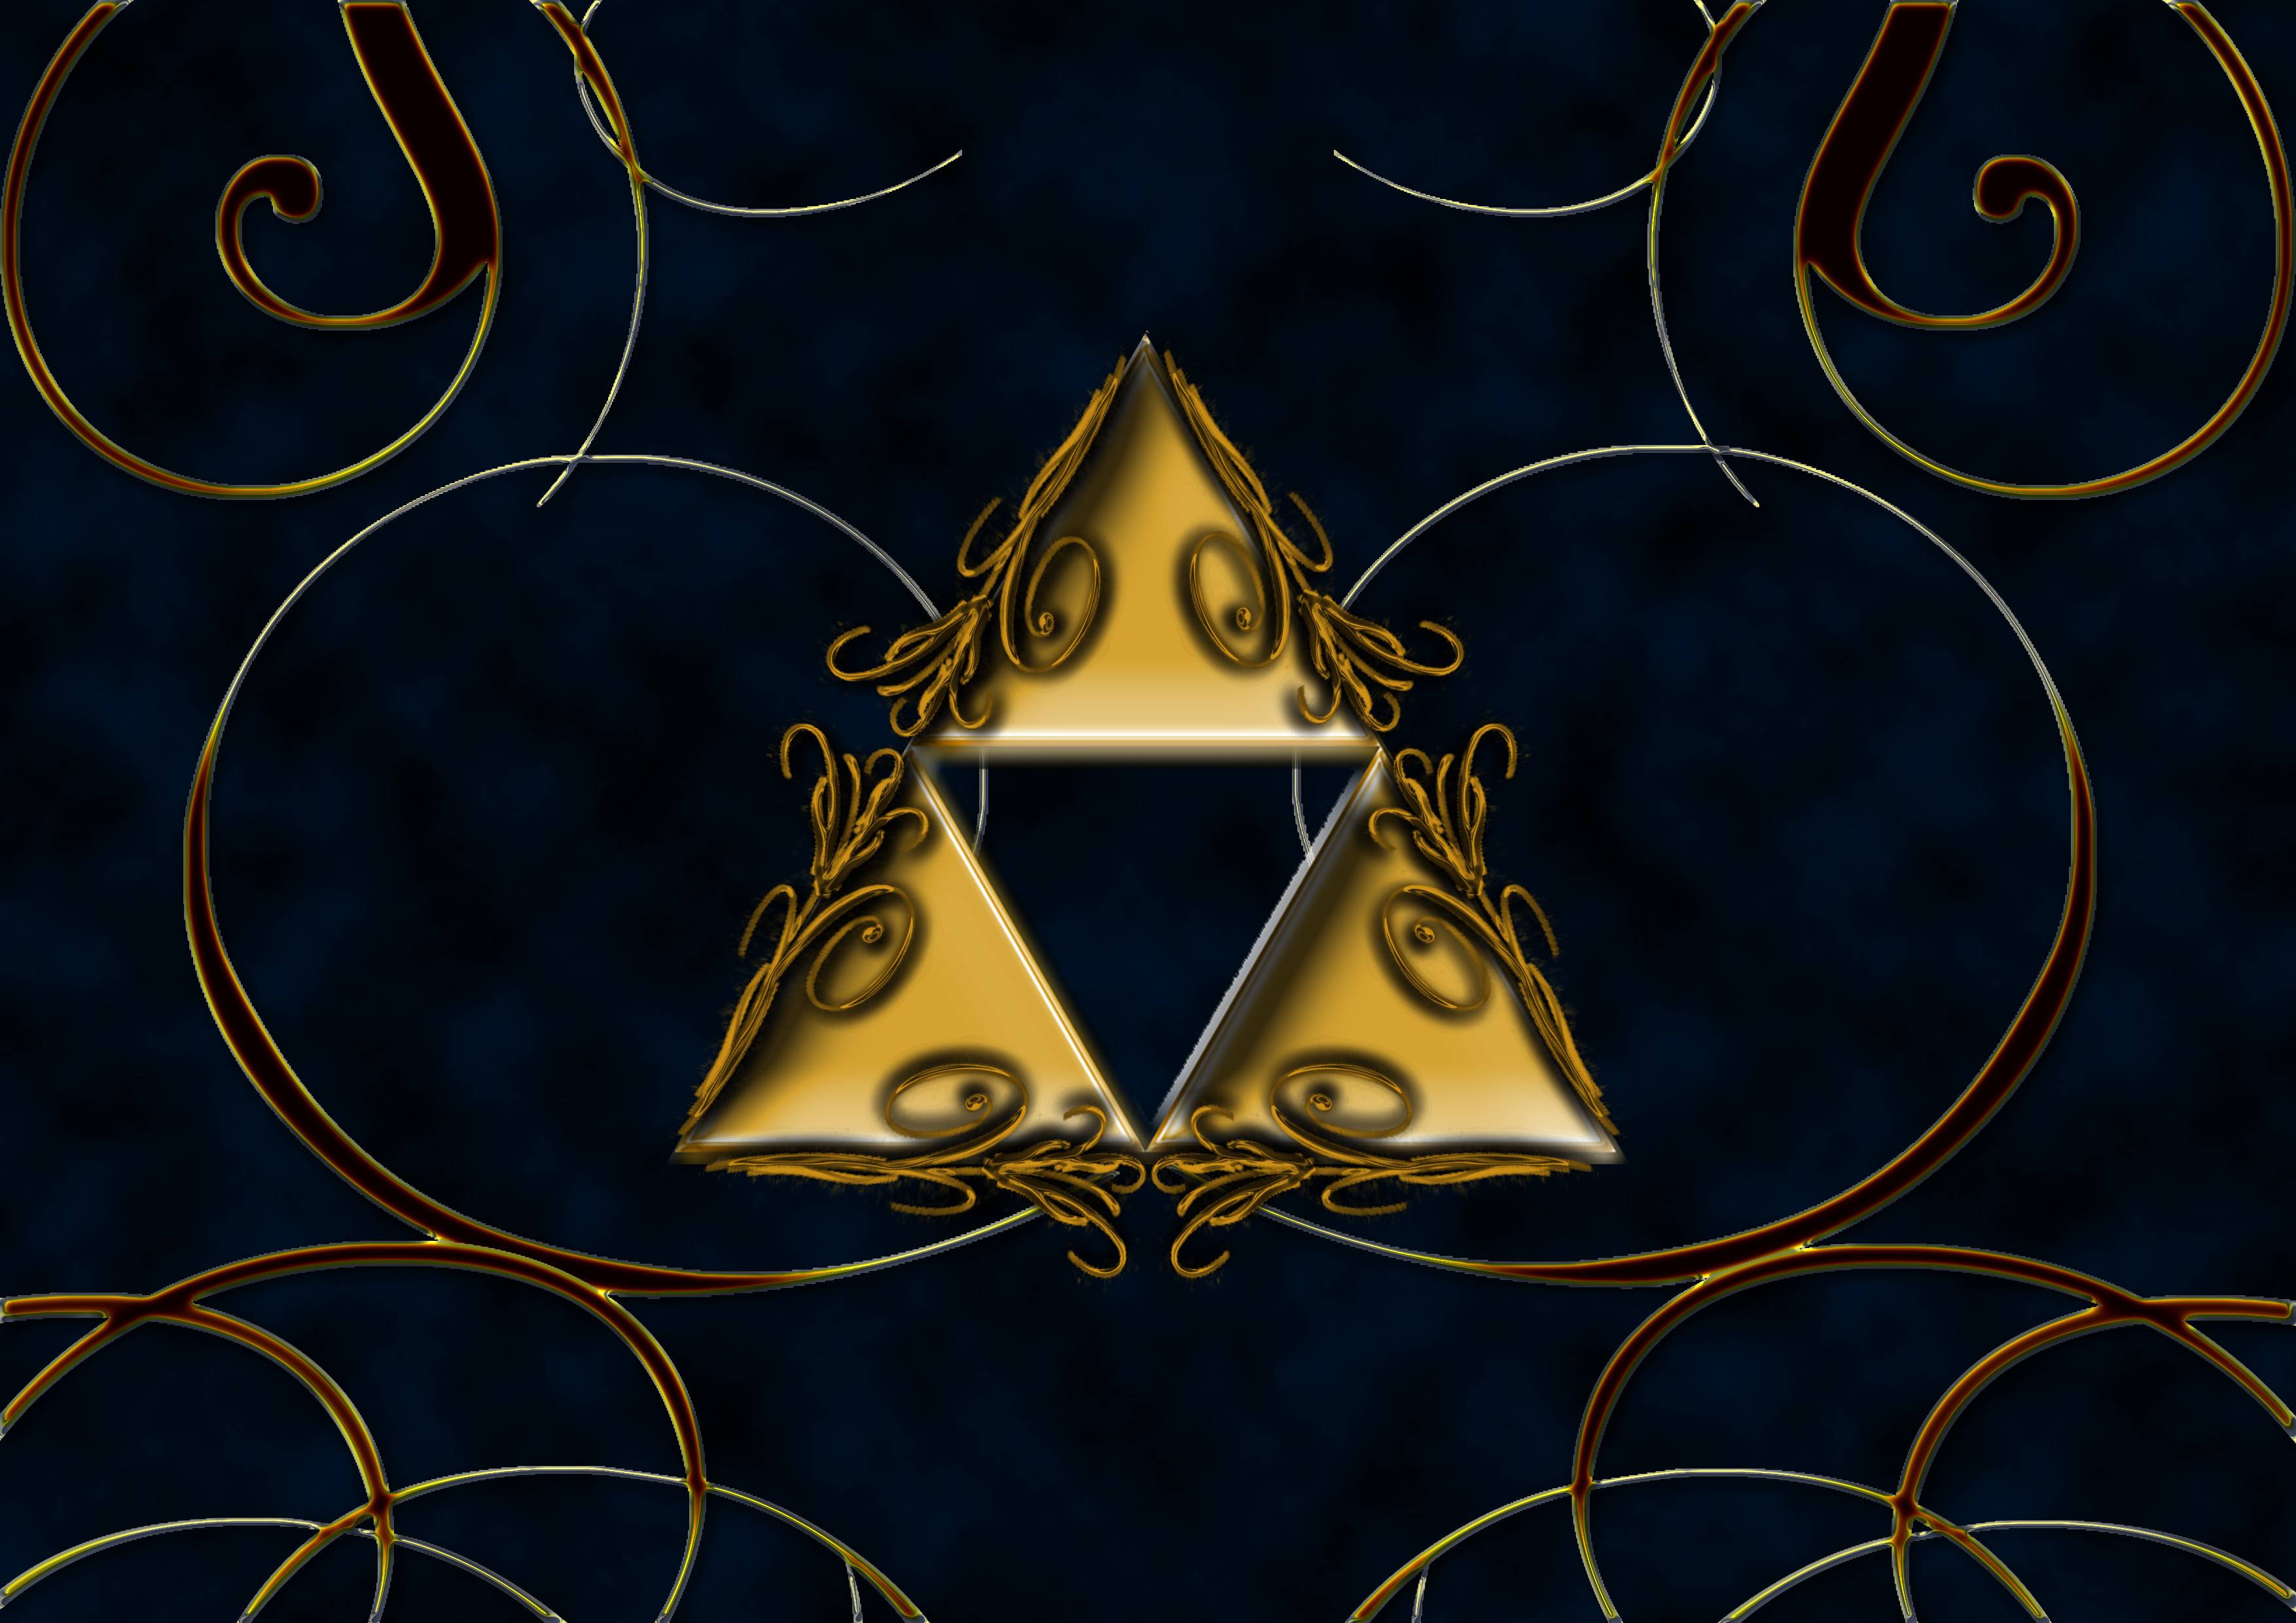 Triforce wallpaper - - High Quality and Resolution